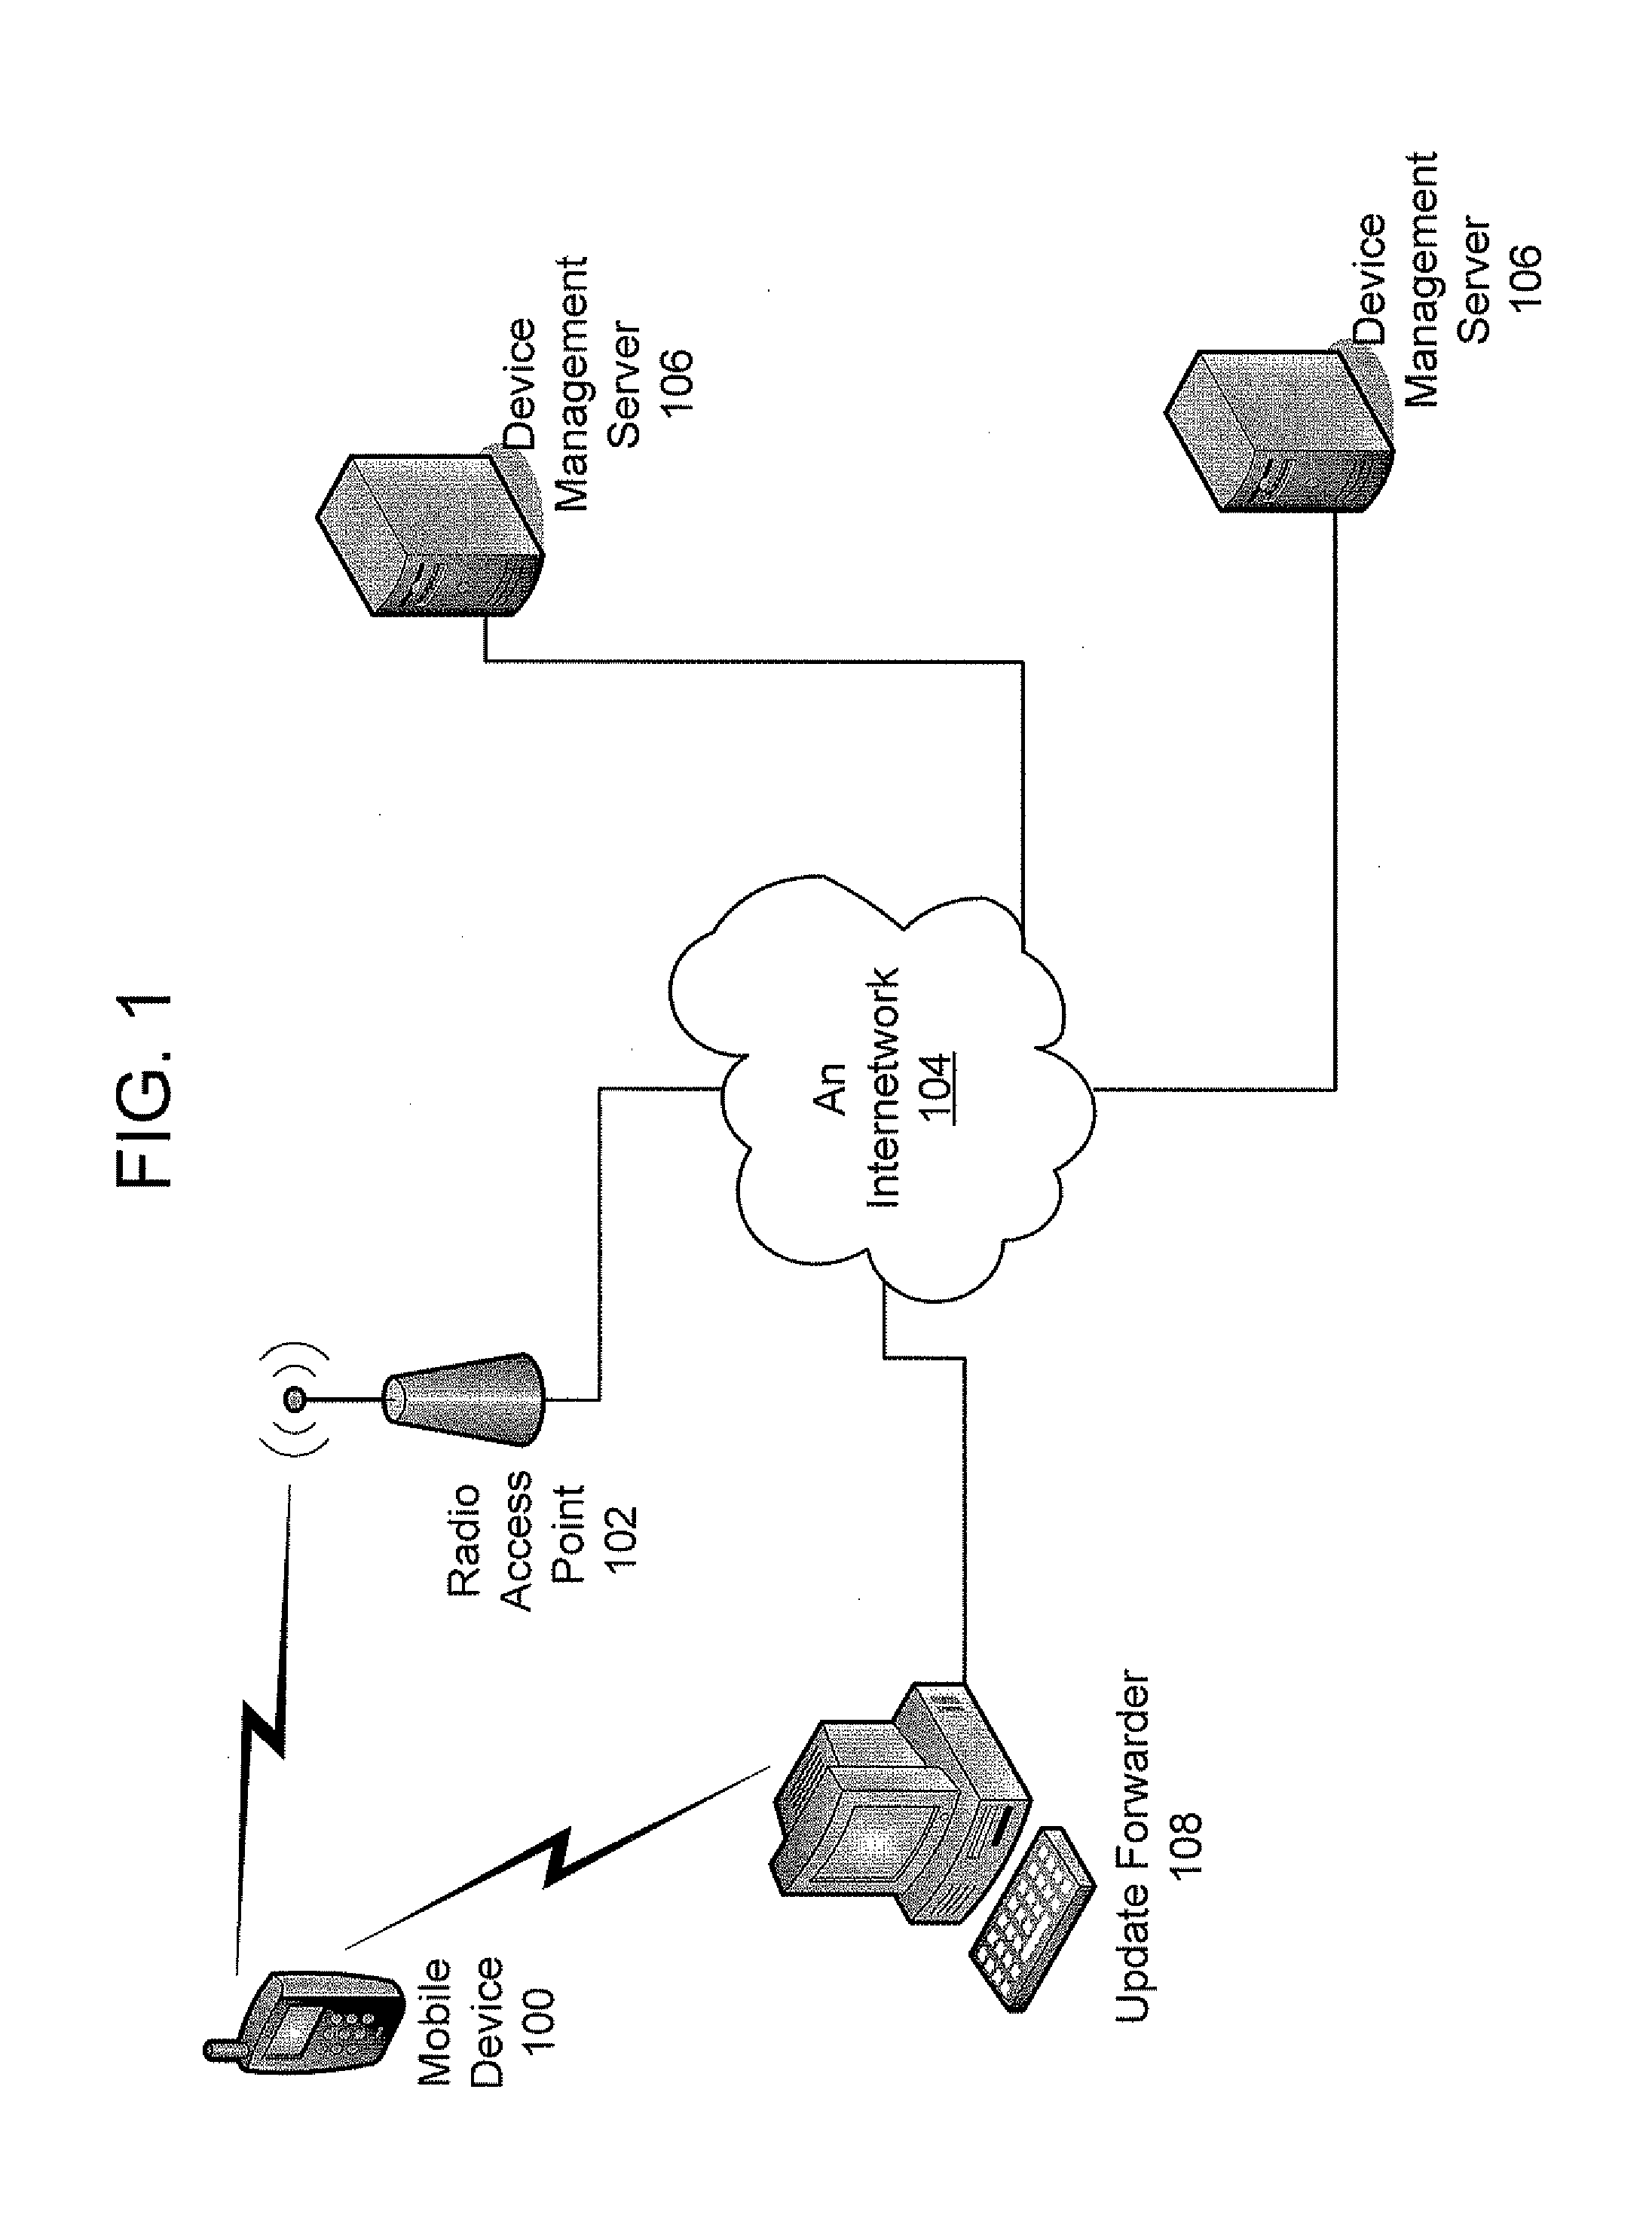 Distributing Mobile-Device Applications